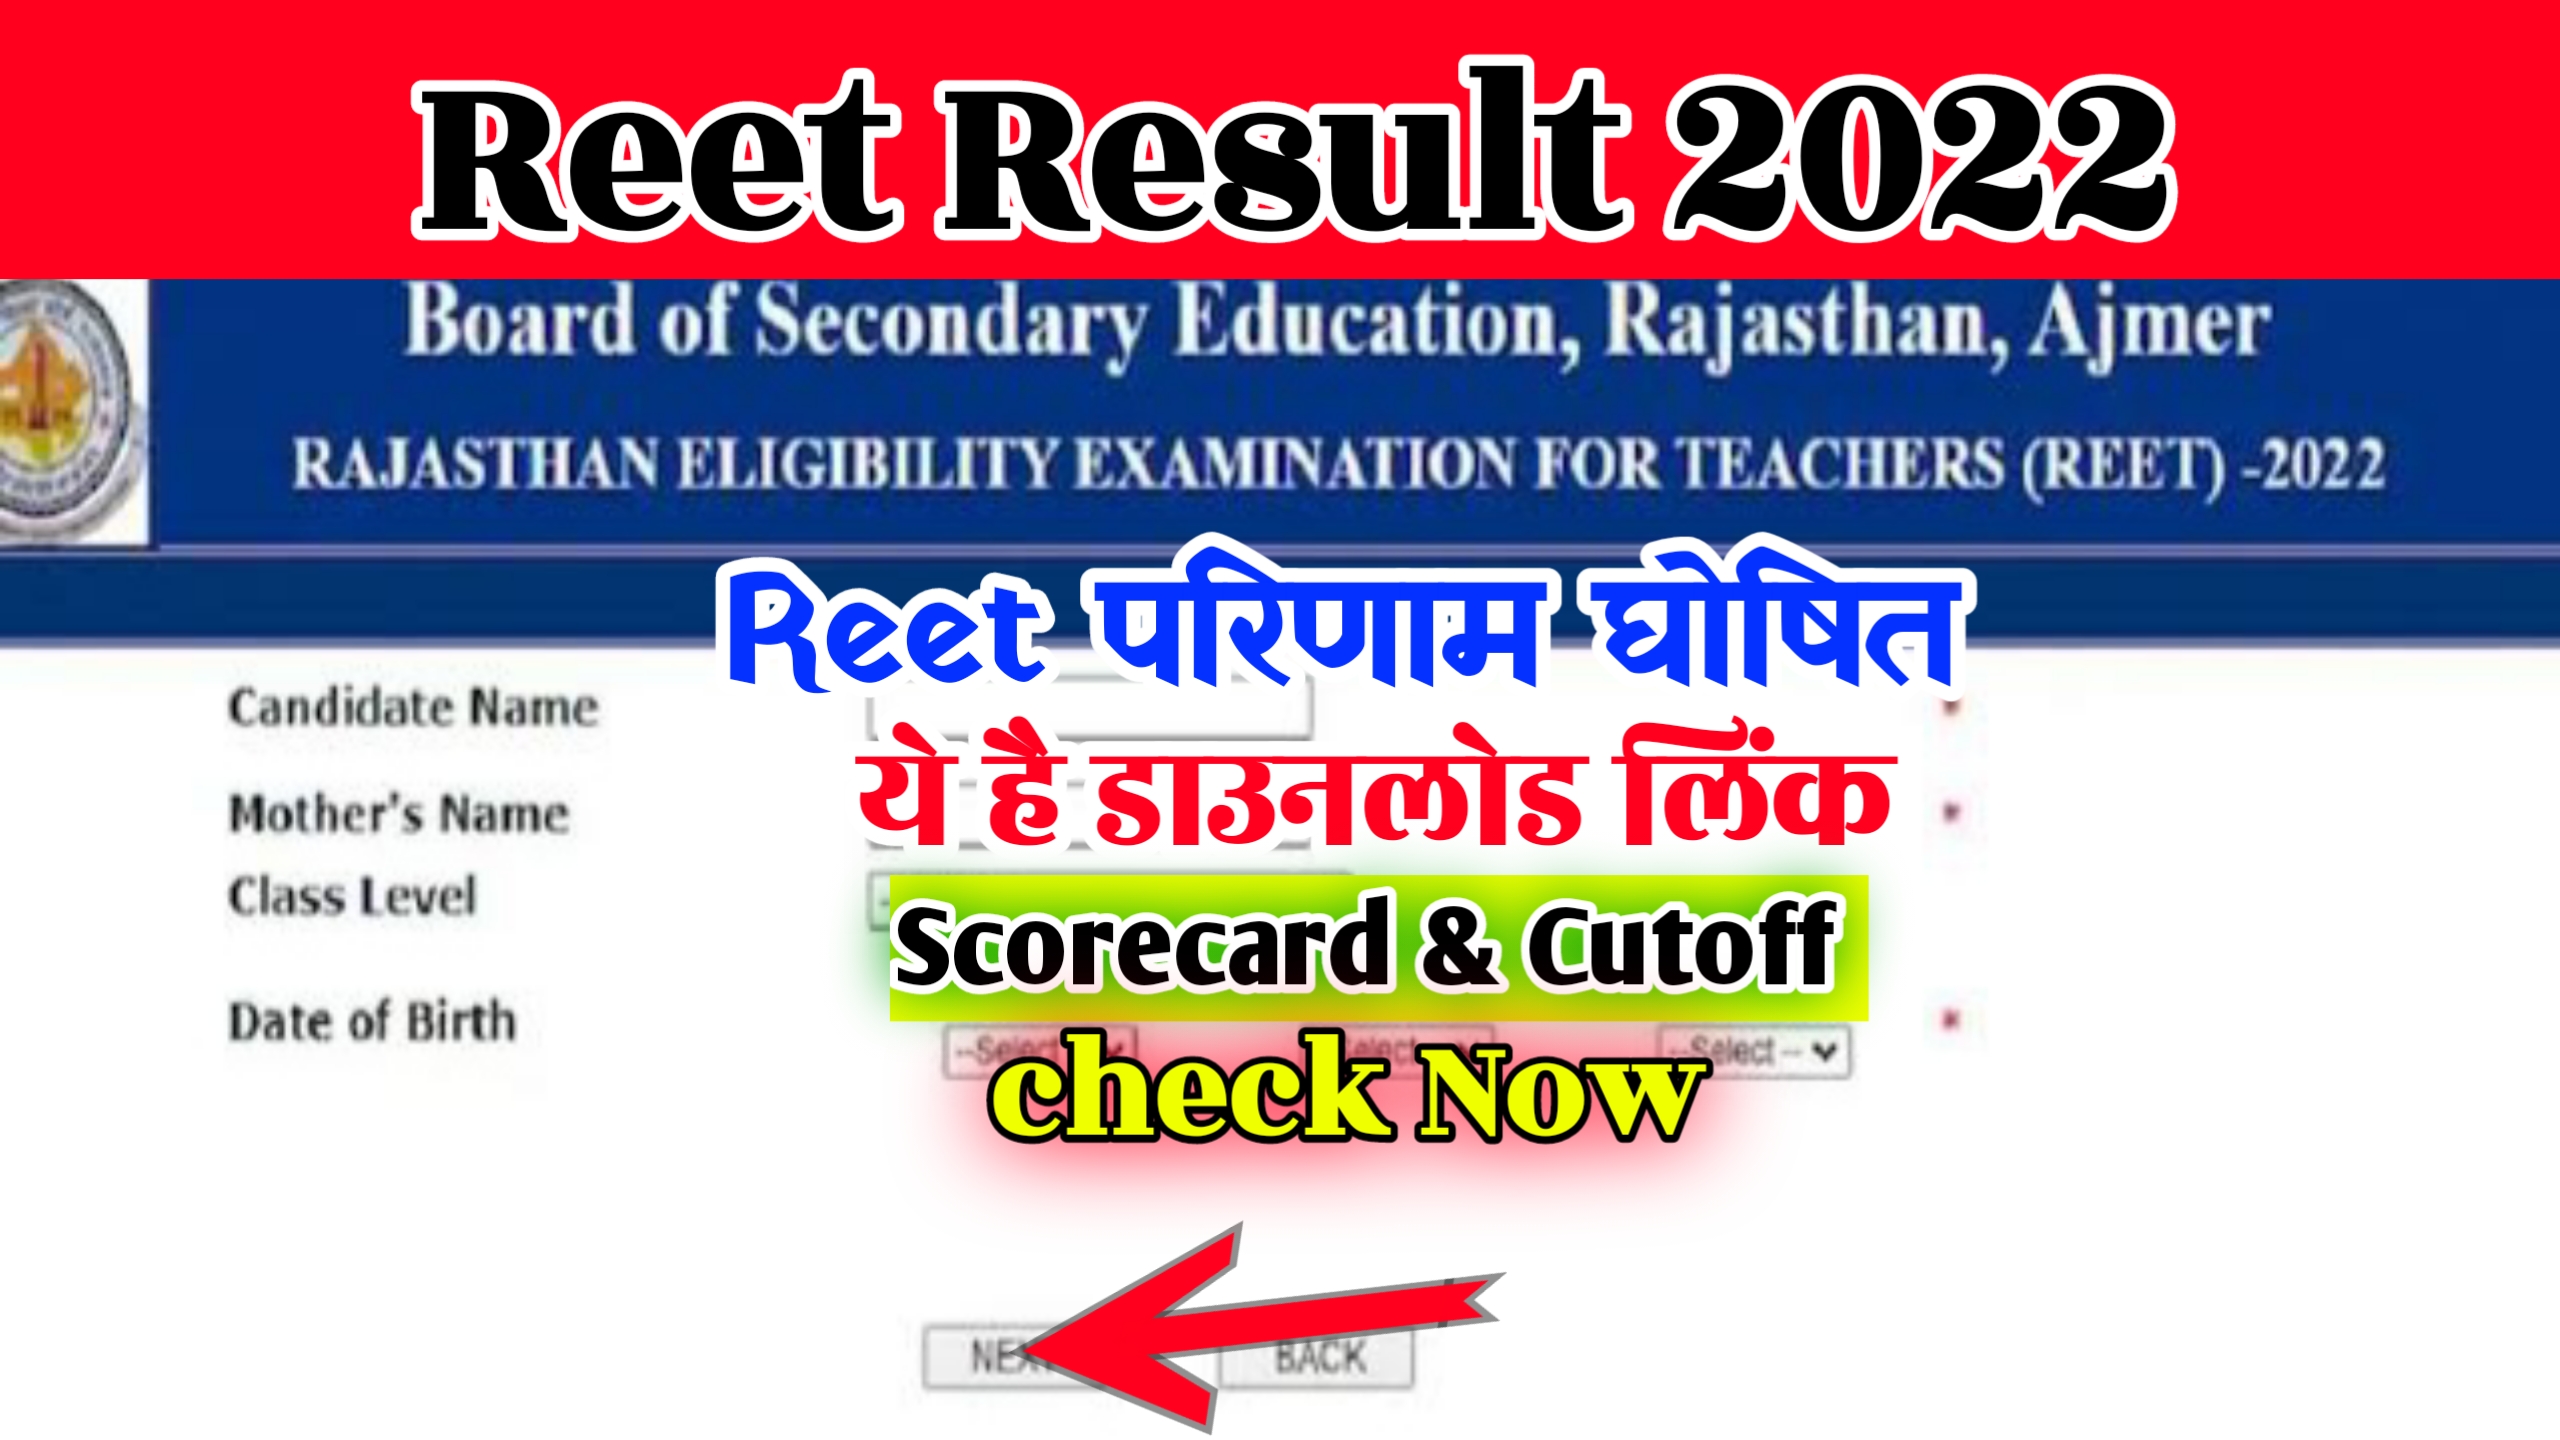 Reet Result 2022 Out Link- Level 1/2 Scorecard @reetbser2022.in